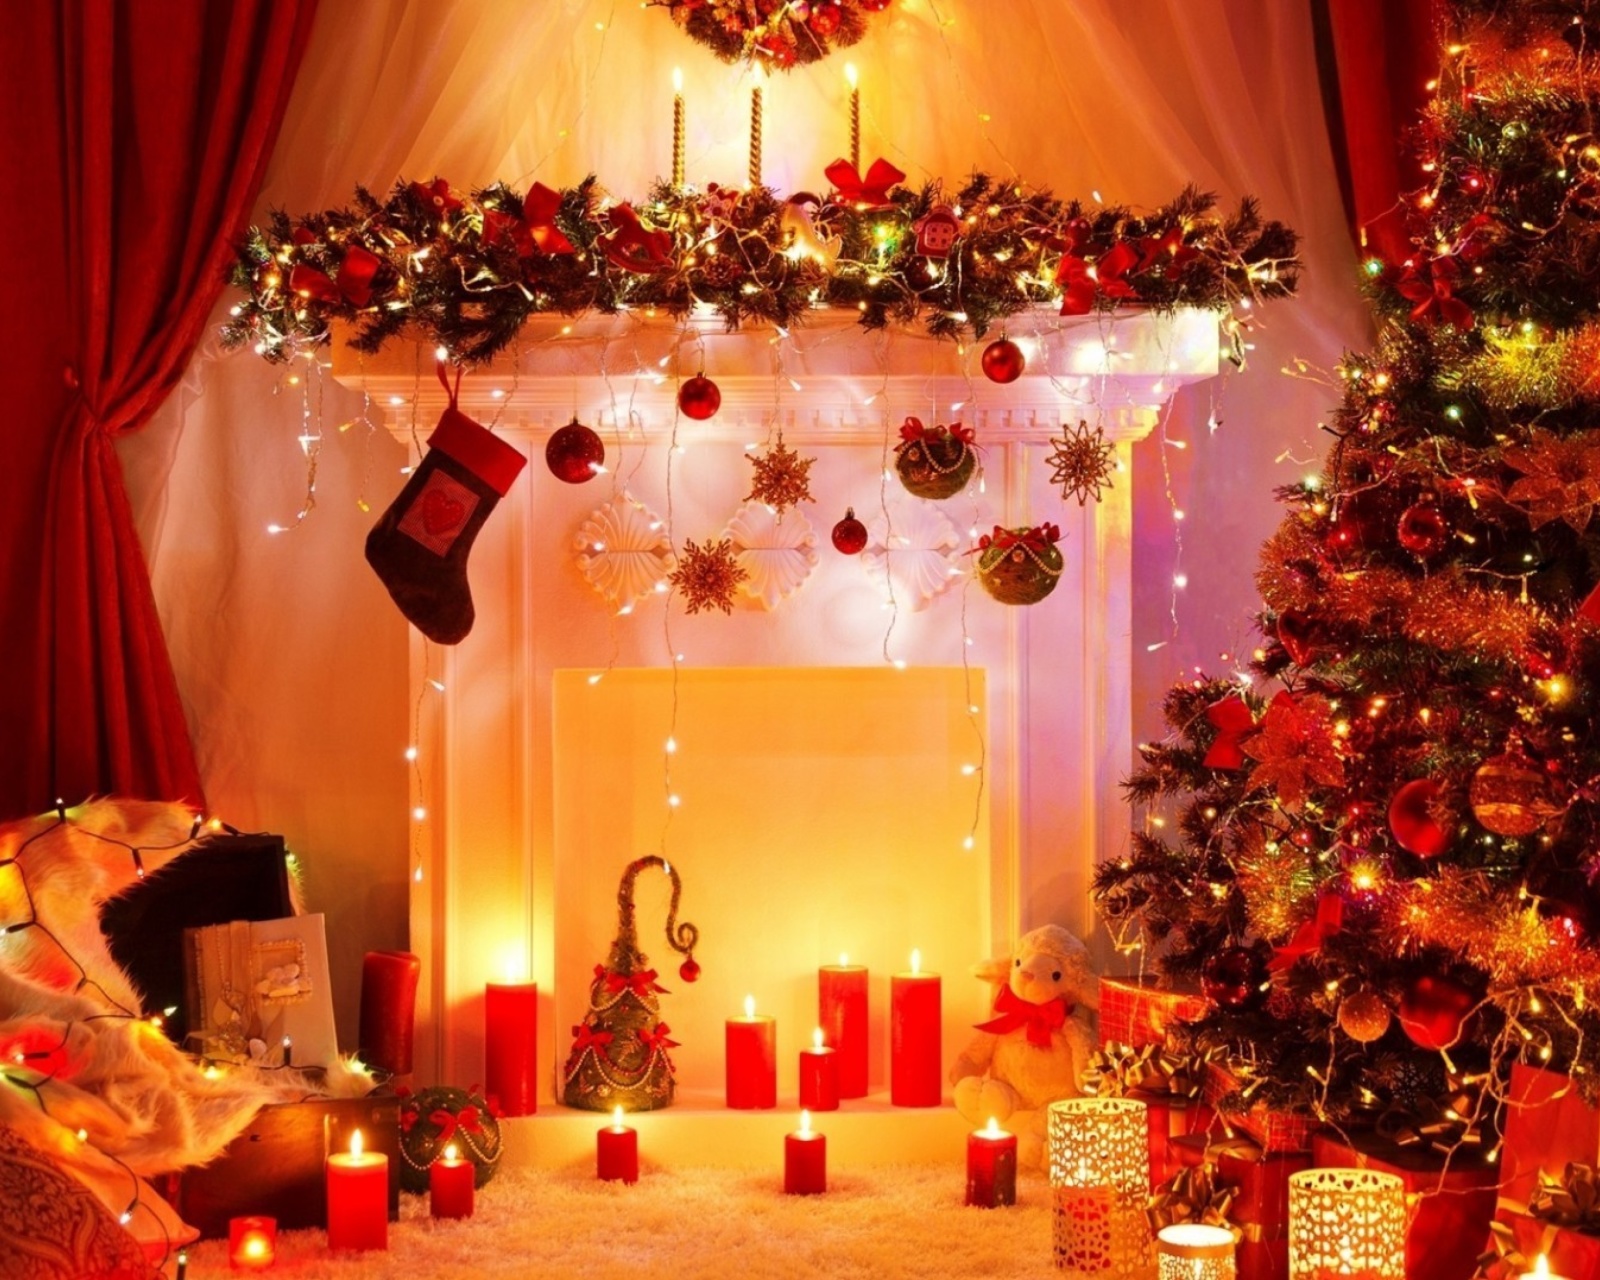 Home christmas decorations 2021 wallpaper 1600x1280